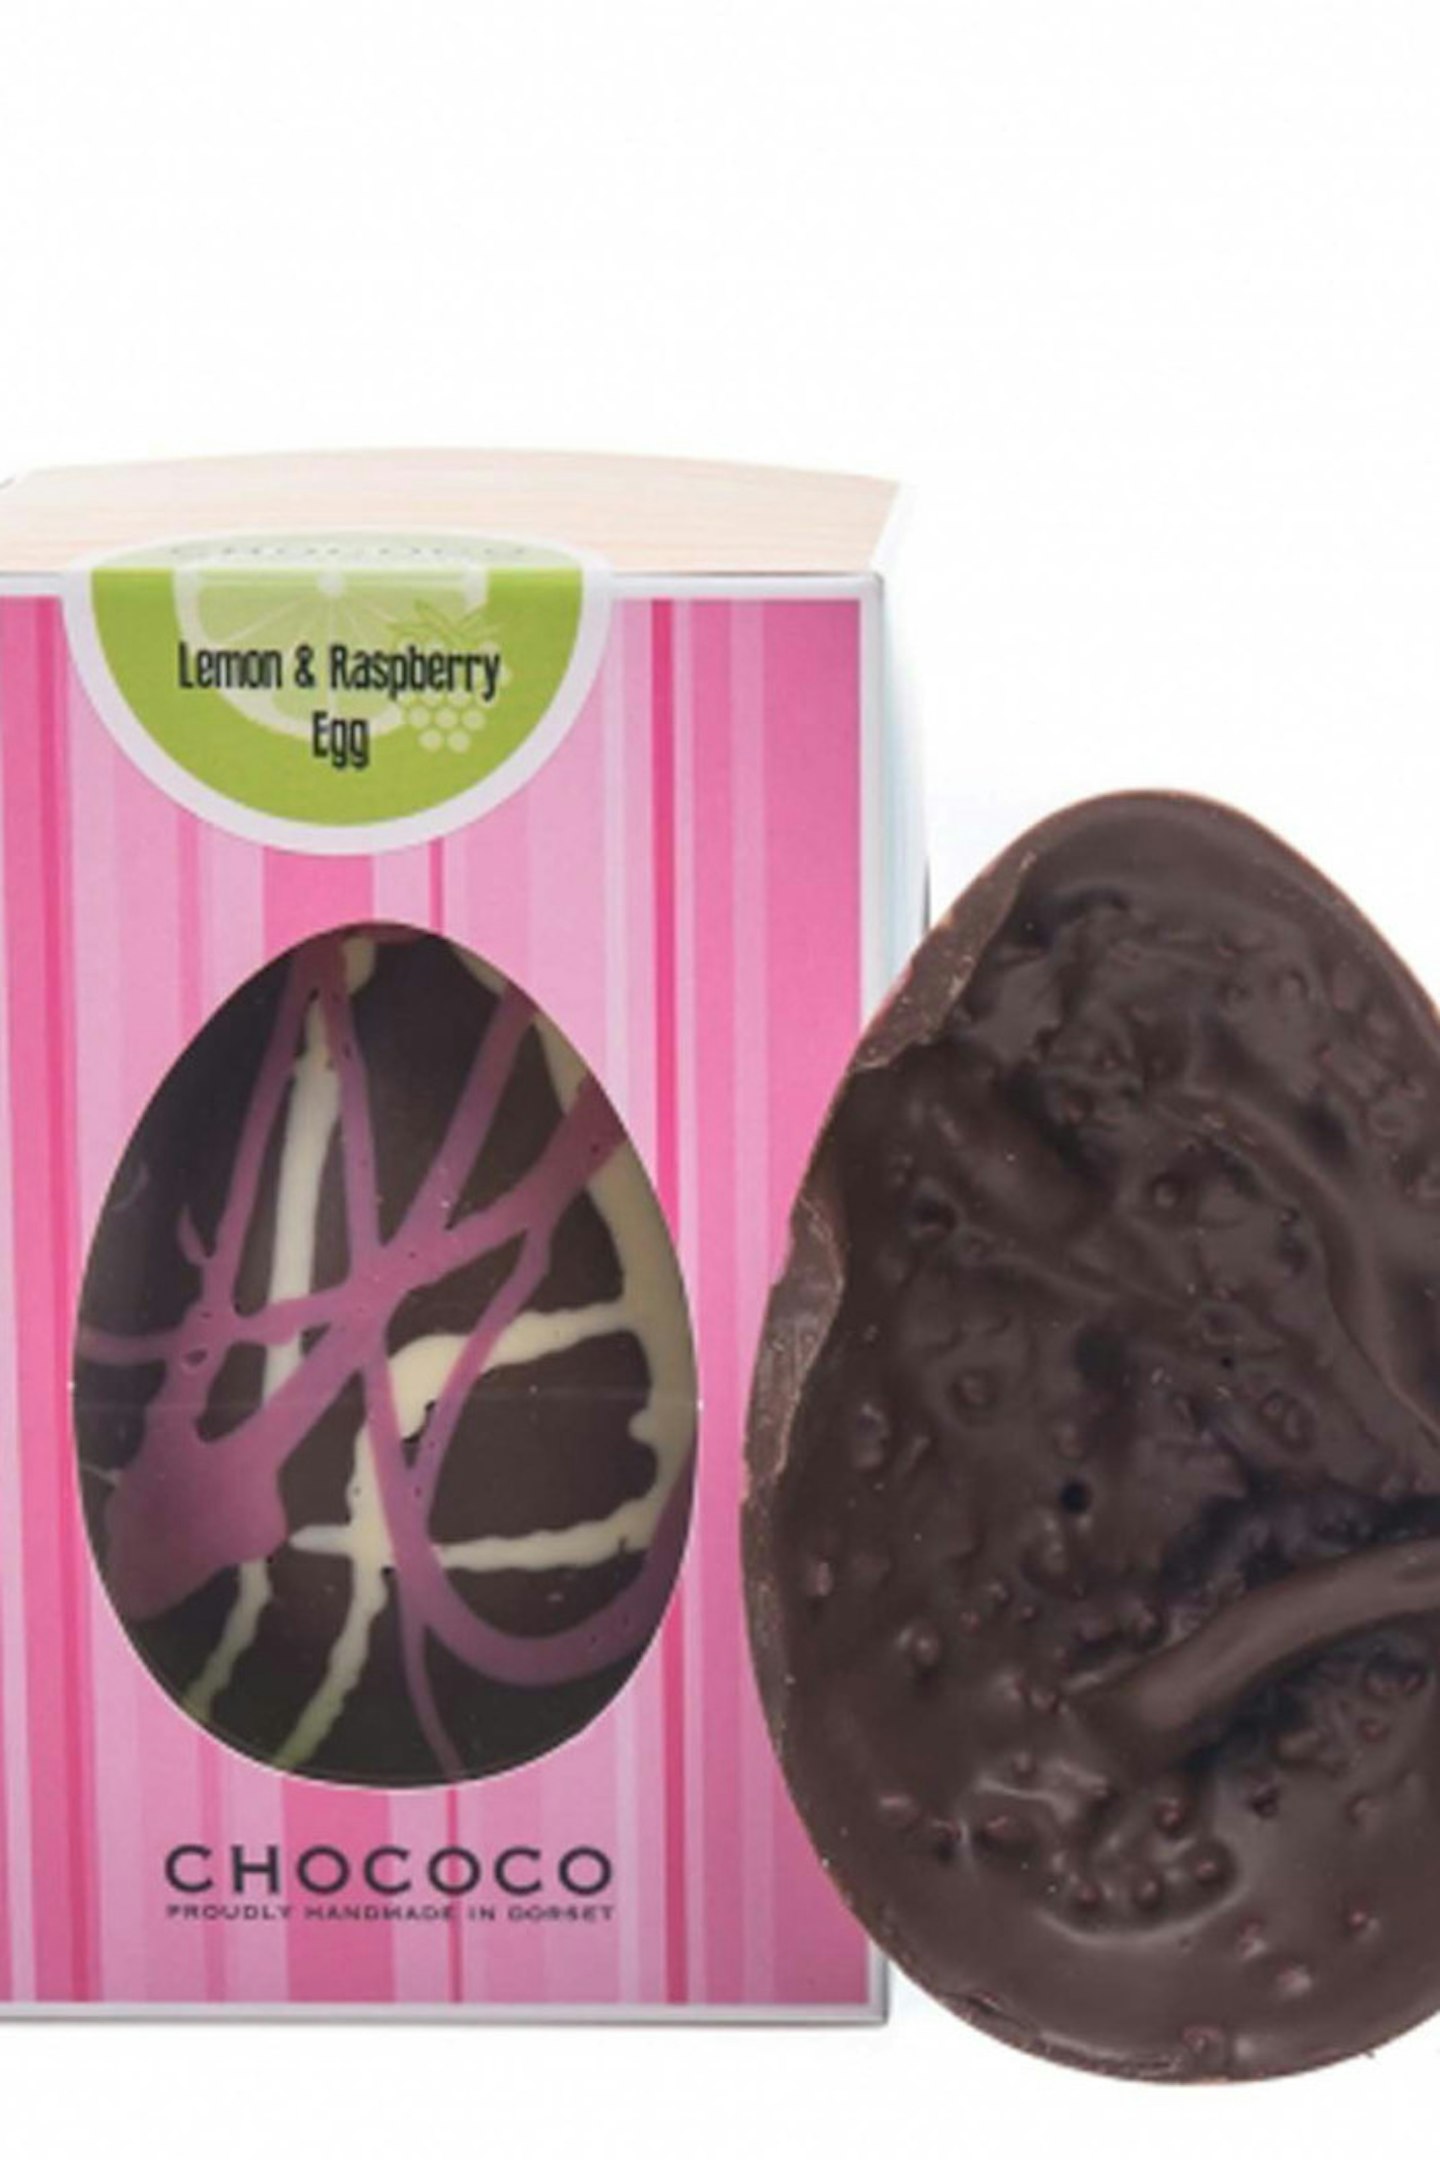 CHOCOCO Lemon And Raspberry Egg 175g Availability- In stock £11.95 - See more at- http-__www.harveynichols.com_1972382-lemon-and-raspberry-egg-175g harvey nichs